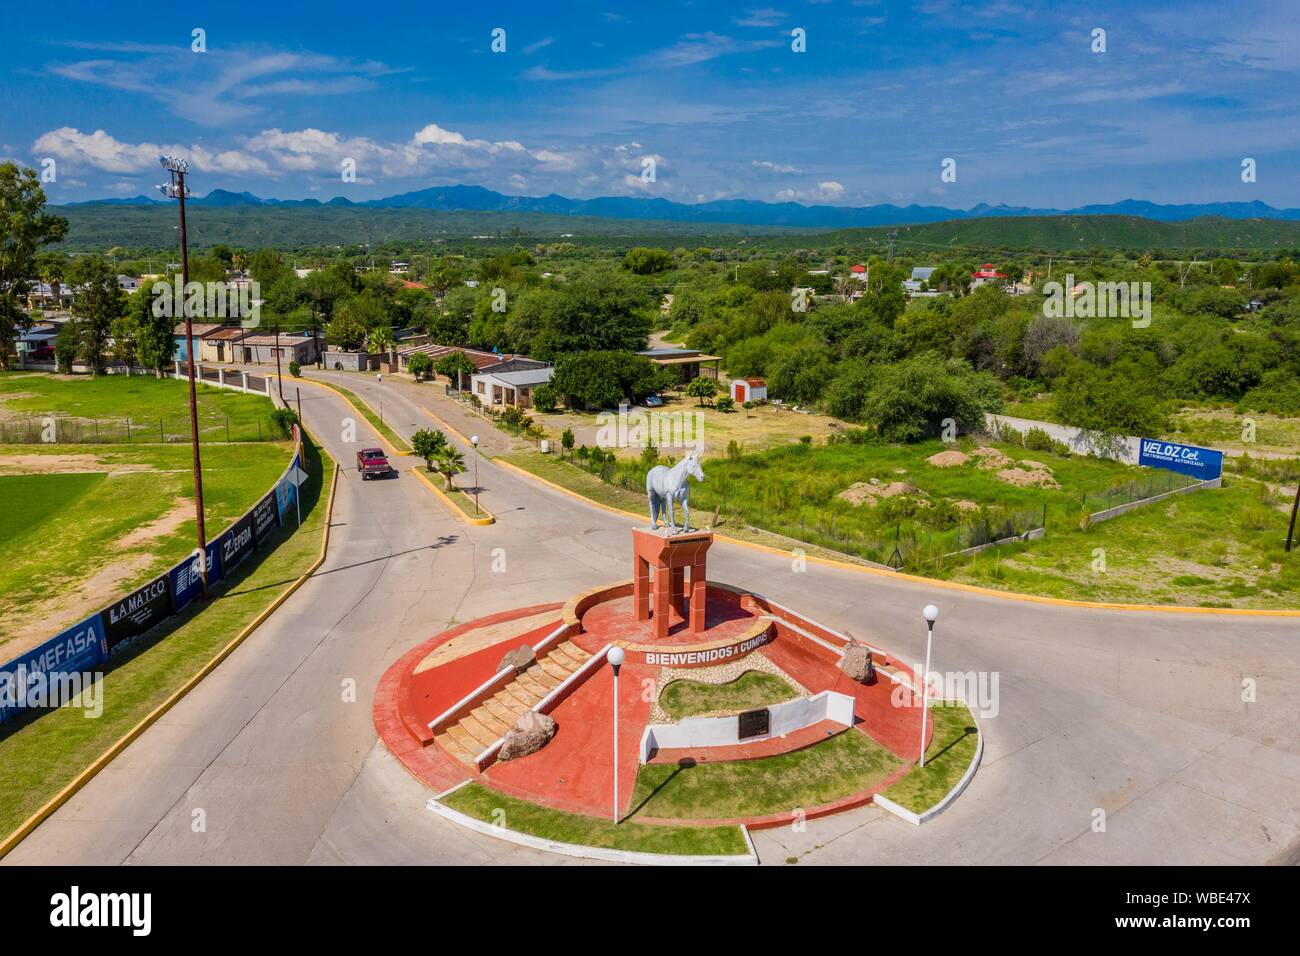 Aerial view of the statue or monument of the famous horse, El Moro de Cumpas, the entrance of the town of Cumpas, Sonora, Mexico. Route of the Sierra in Sonora Mexico. located in the lower region of the Sierra Madre Occidente. It was founded in 1643 by the Jesuit missionary Egidio Monteffio under the name of Our Lady of the Assumption of Cumpas, with the purpose of evangelizing the Opal tribes that inhabited that place in the previous times and during the conquest.  (© Photo: LuisGutierrez / NortePhoto.com)  Vista aerea de la estatua o monumento del famoso caballo , El Moro de Cumpas, la entra Stock Photo